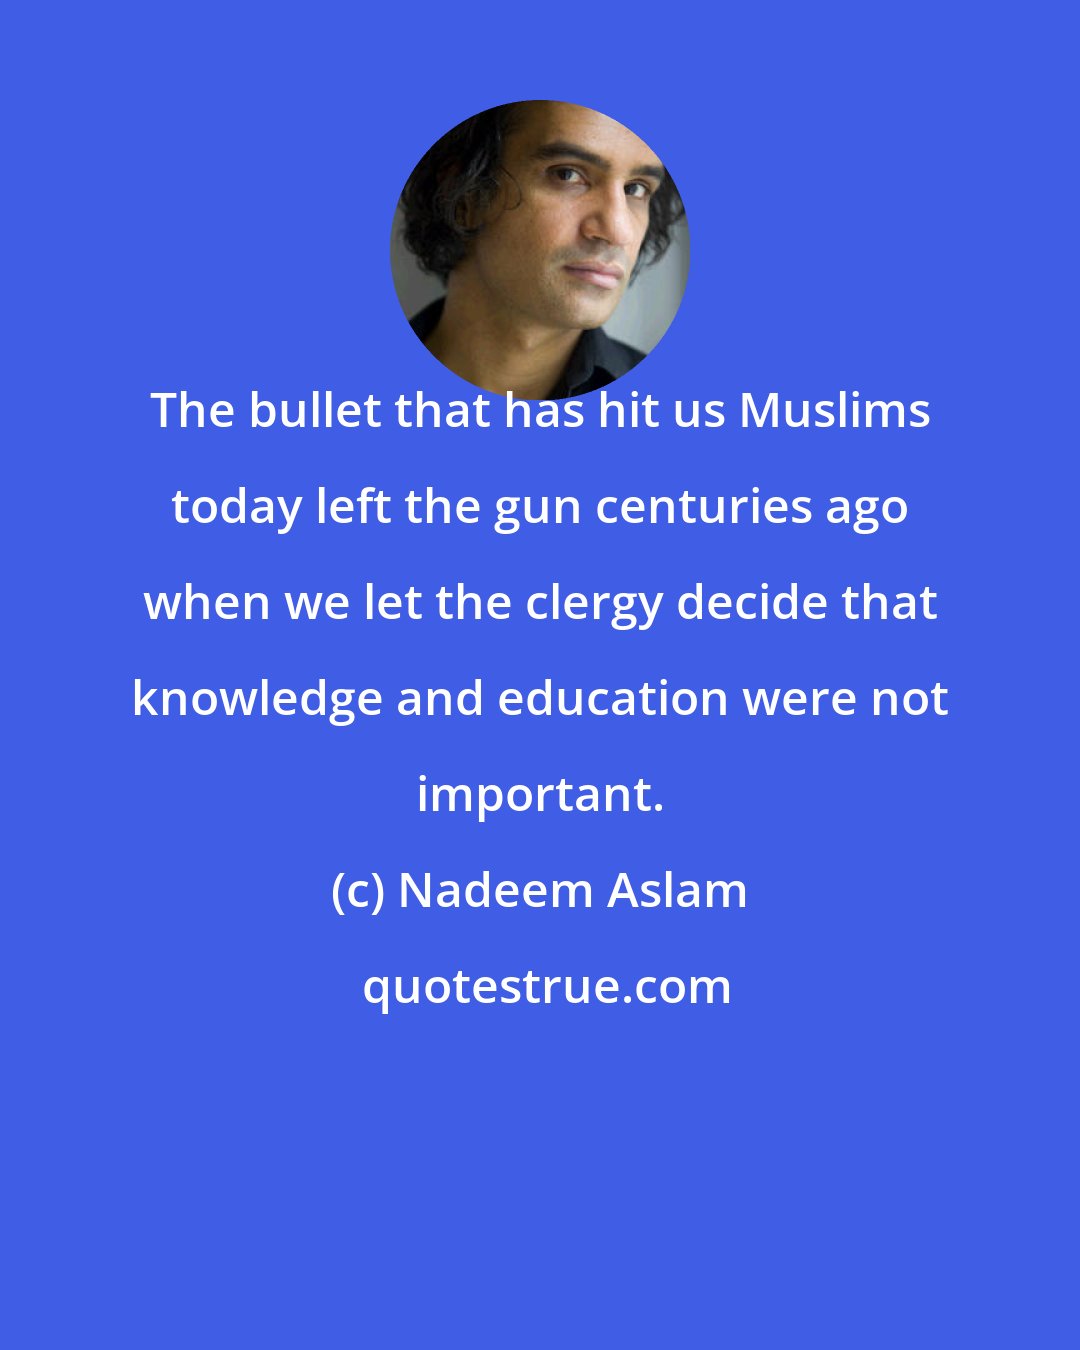 Nadeem Aslam: The bullet that has hit us Muslims today left the gun centuries ago when we let the clergy decide that knowledge and education were not important.